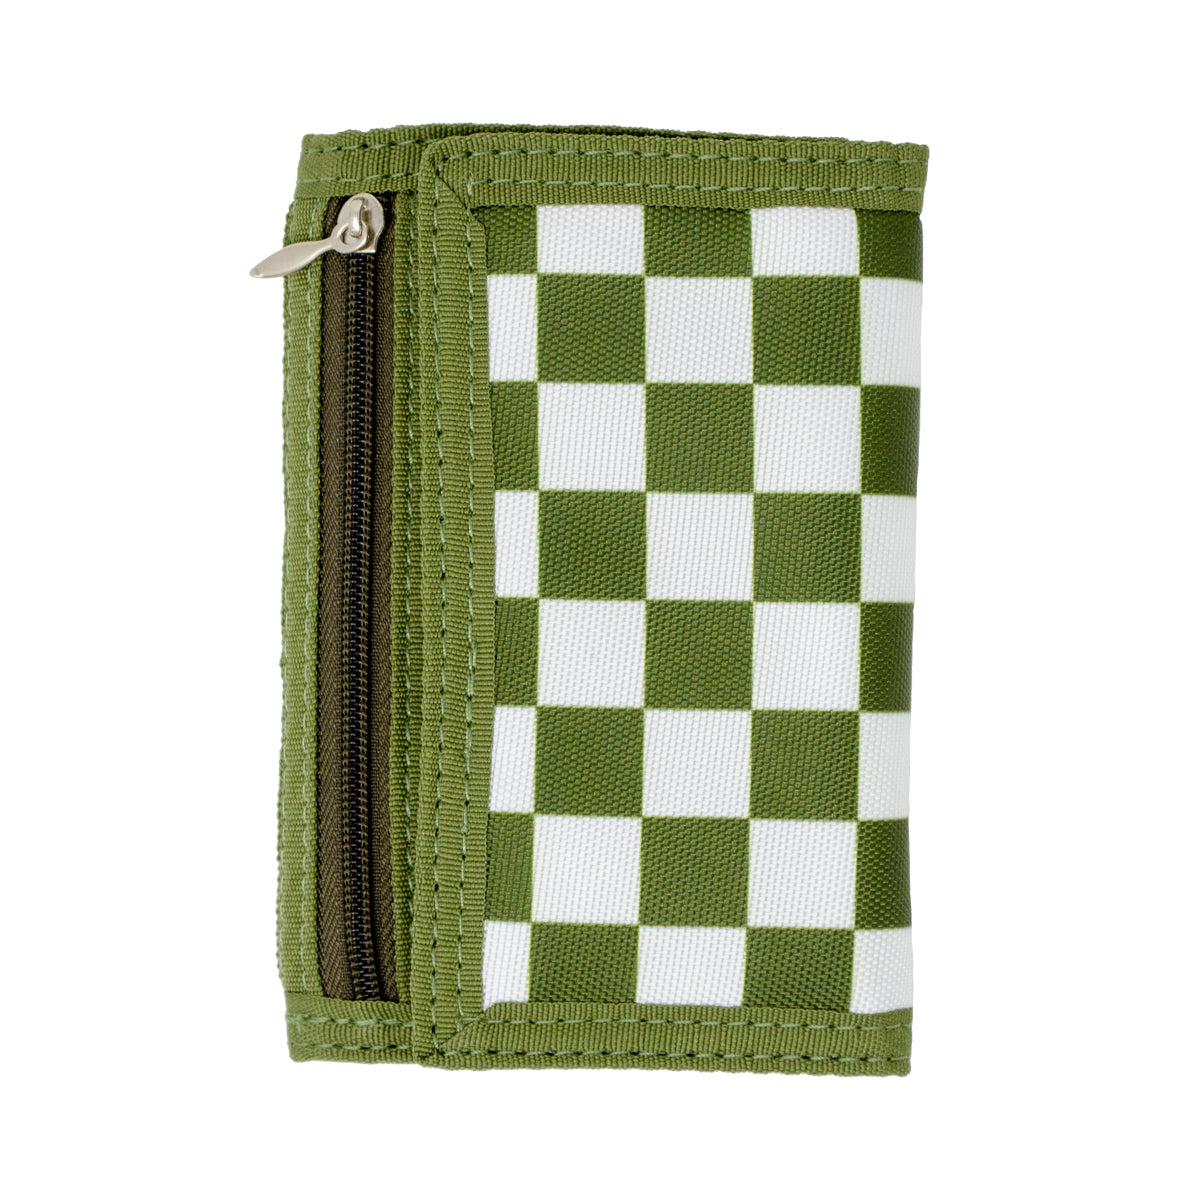 Kid's Checkered Wallet